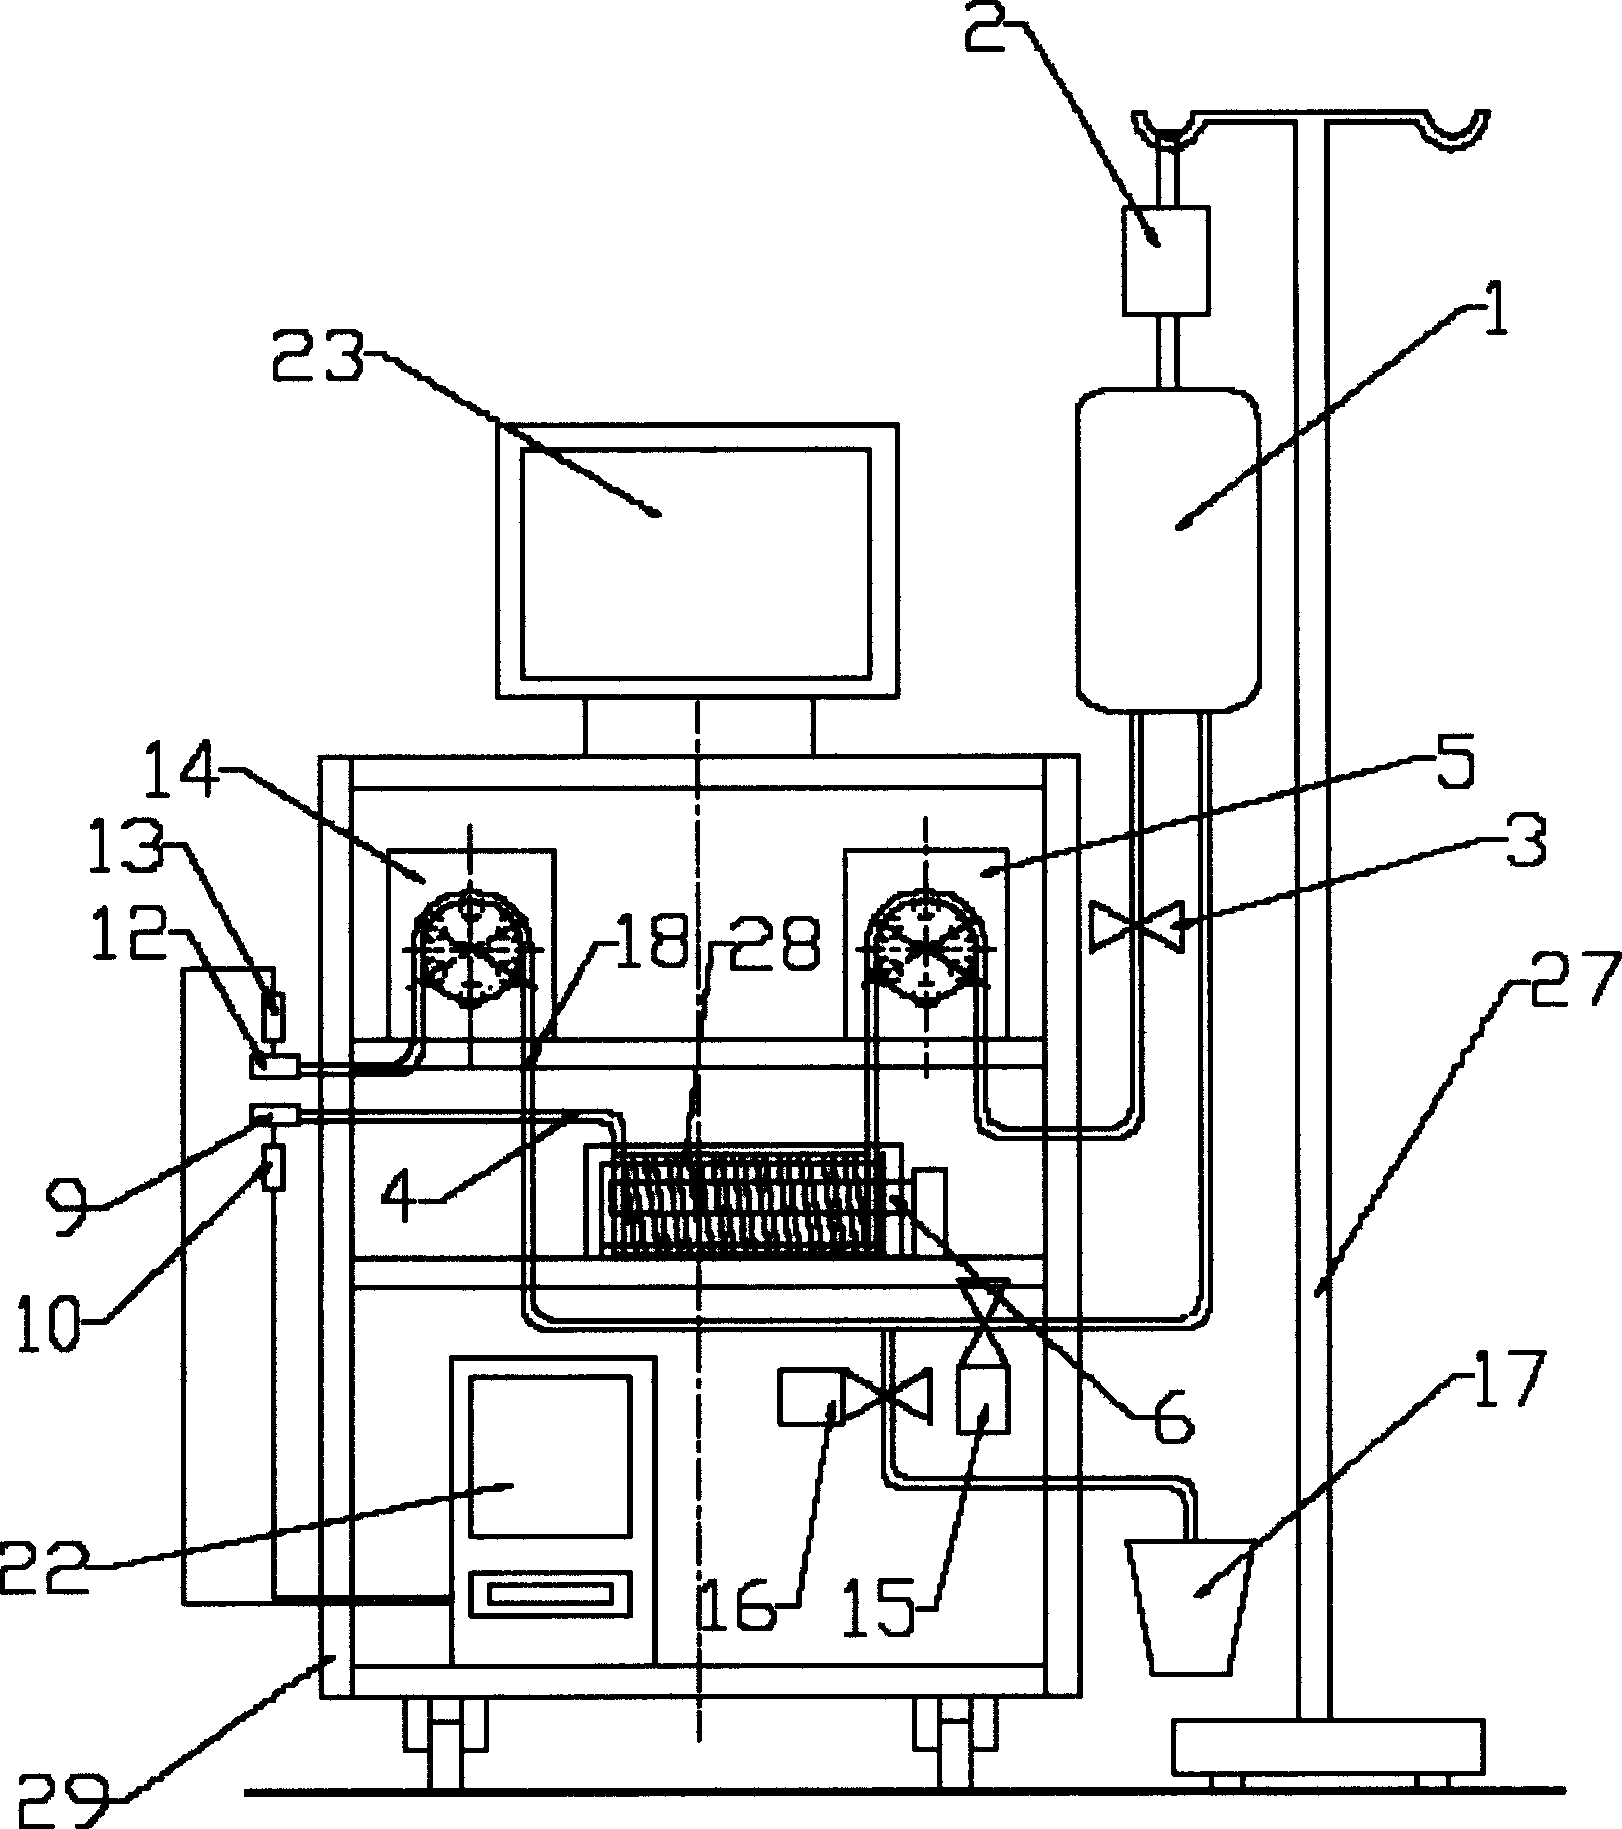 Infrared heat perfusion therapeutic apparatus